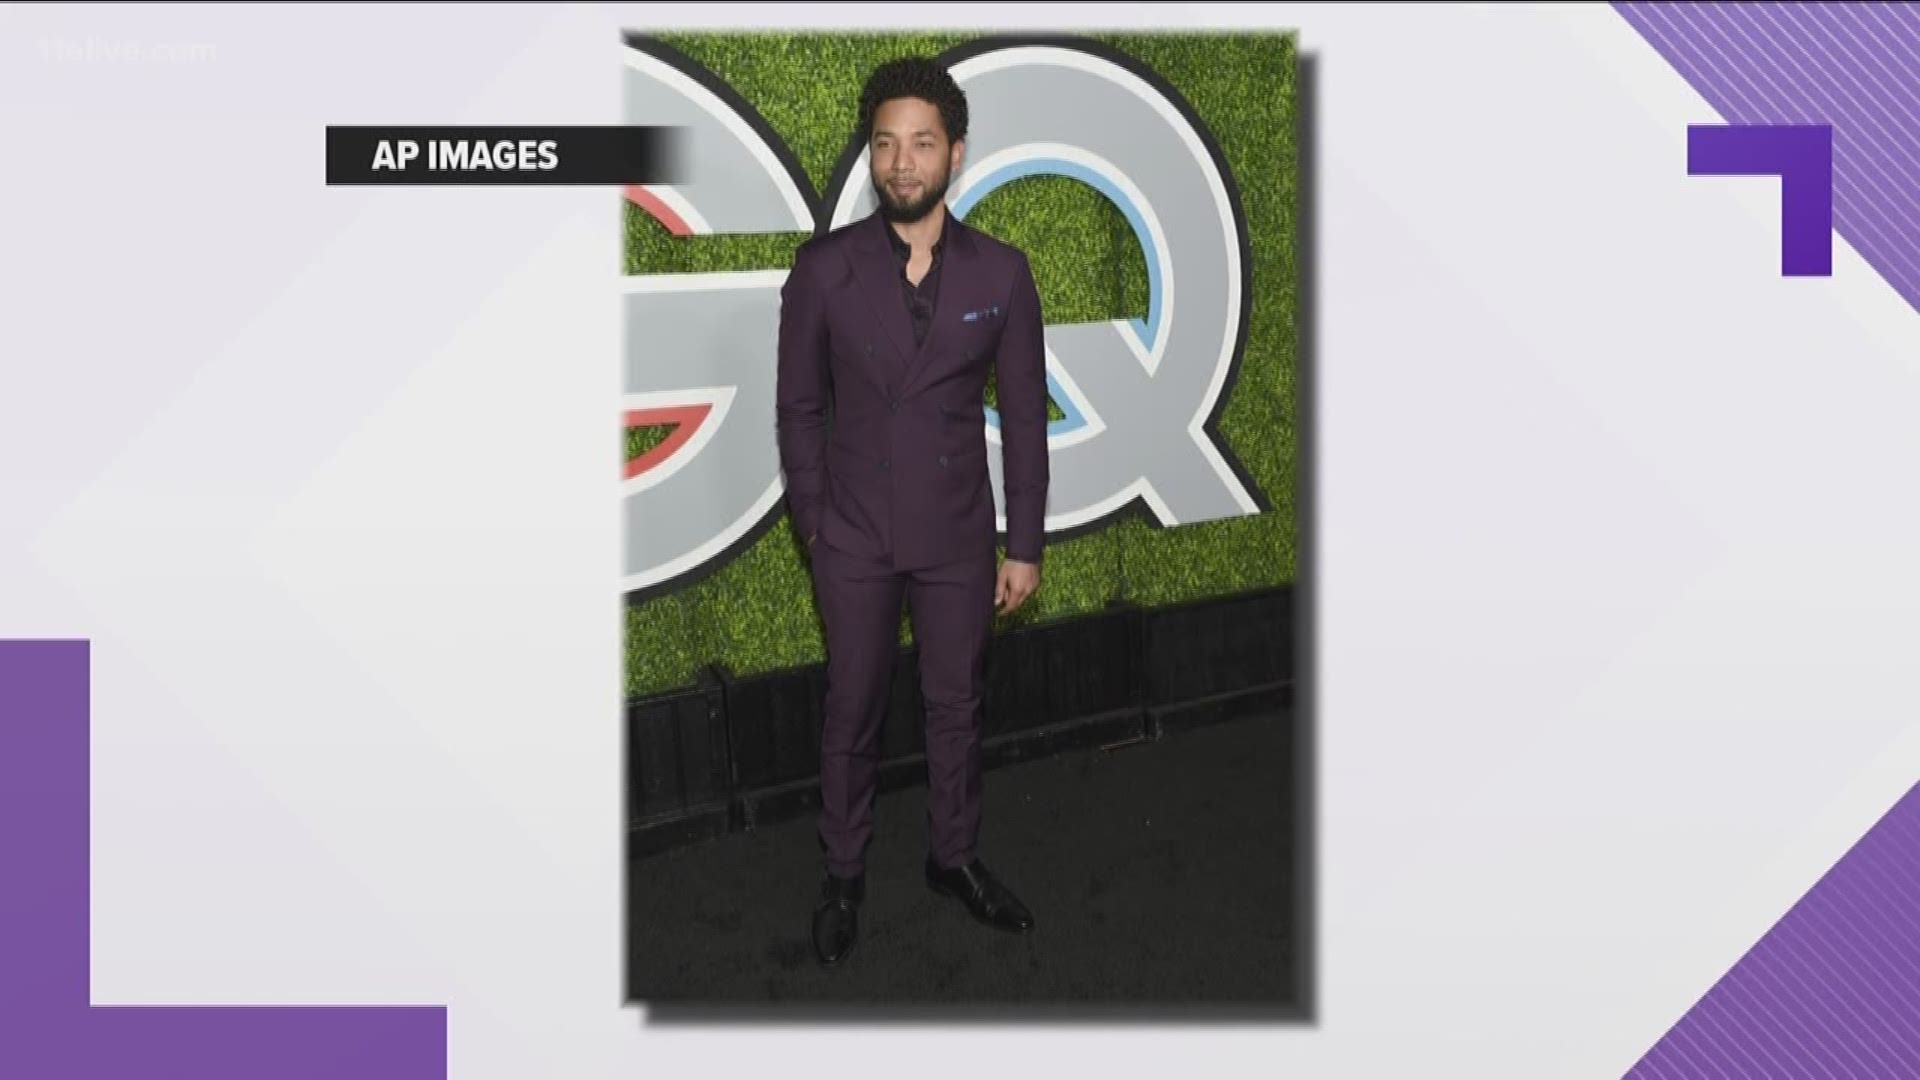 'Empire' actor Jussie Smollett had said two men attacked him in January as he was walking home in downtown Chicago.